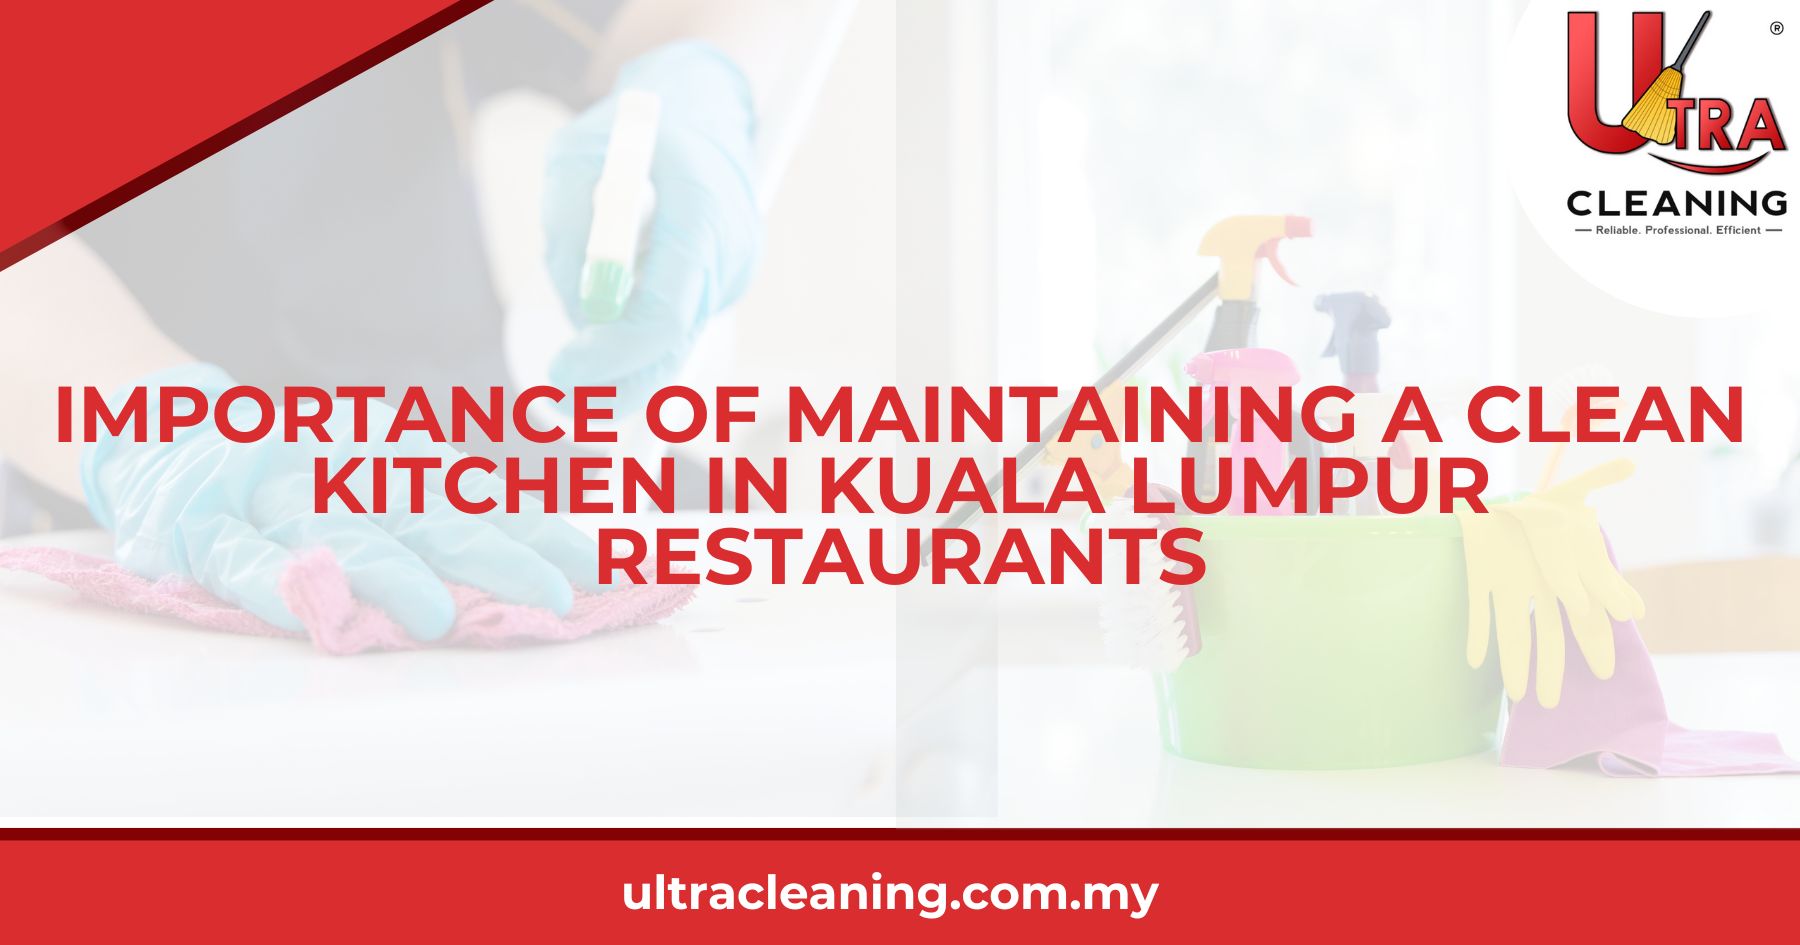 Importance of Maintaining a Clean Kitchen in Kuala Lumpur Restaurants